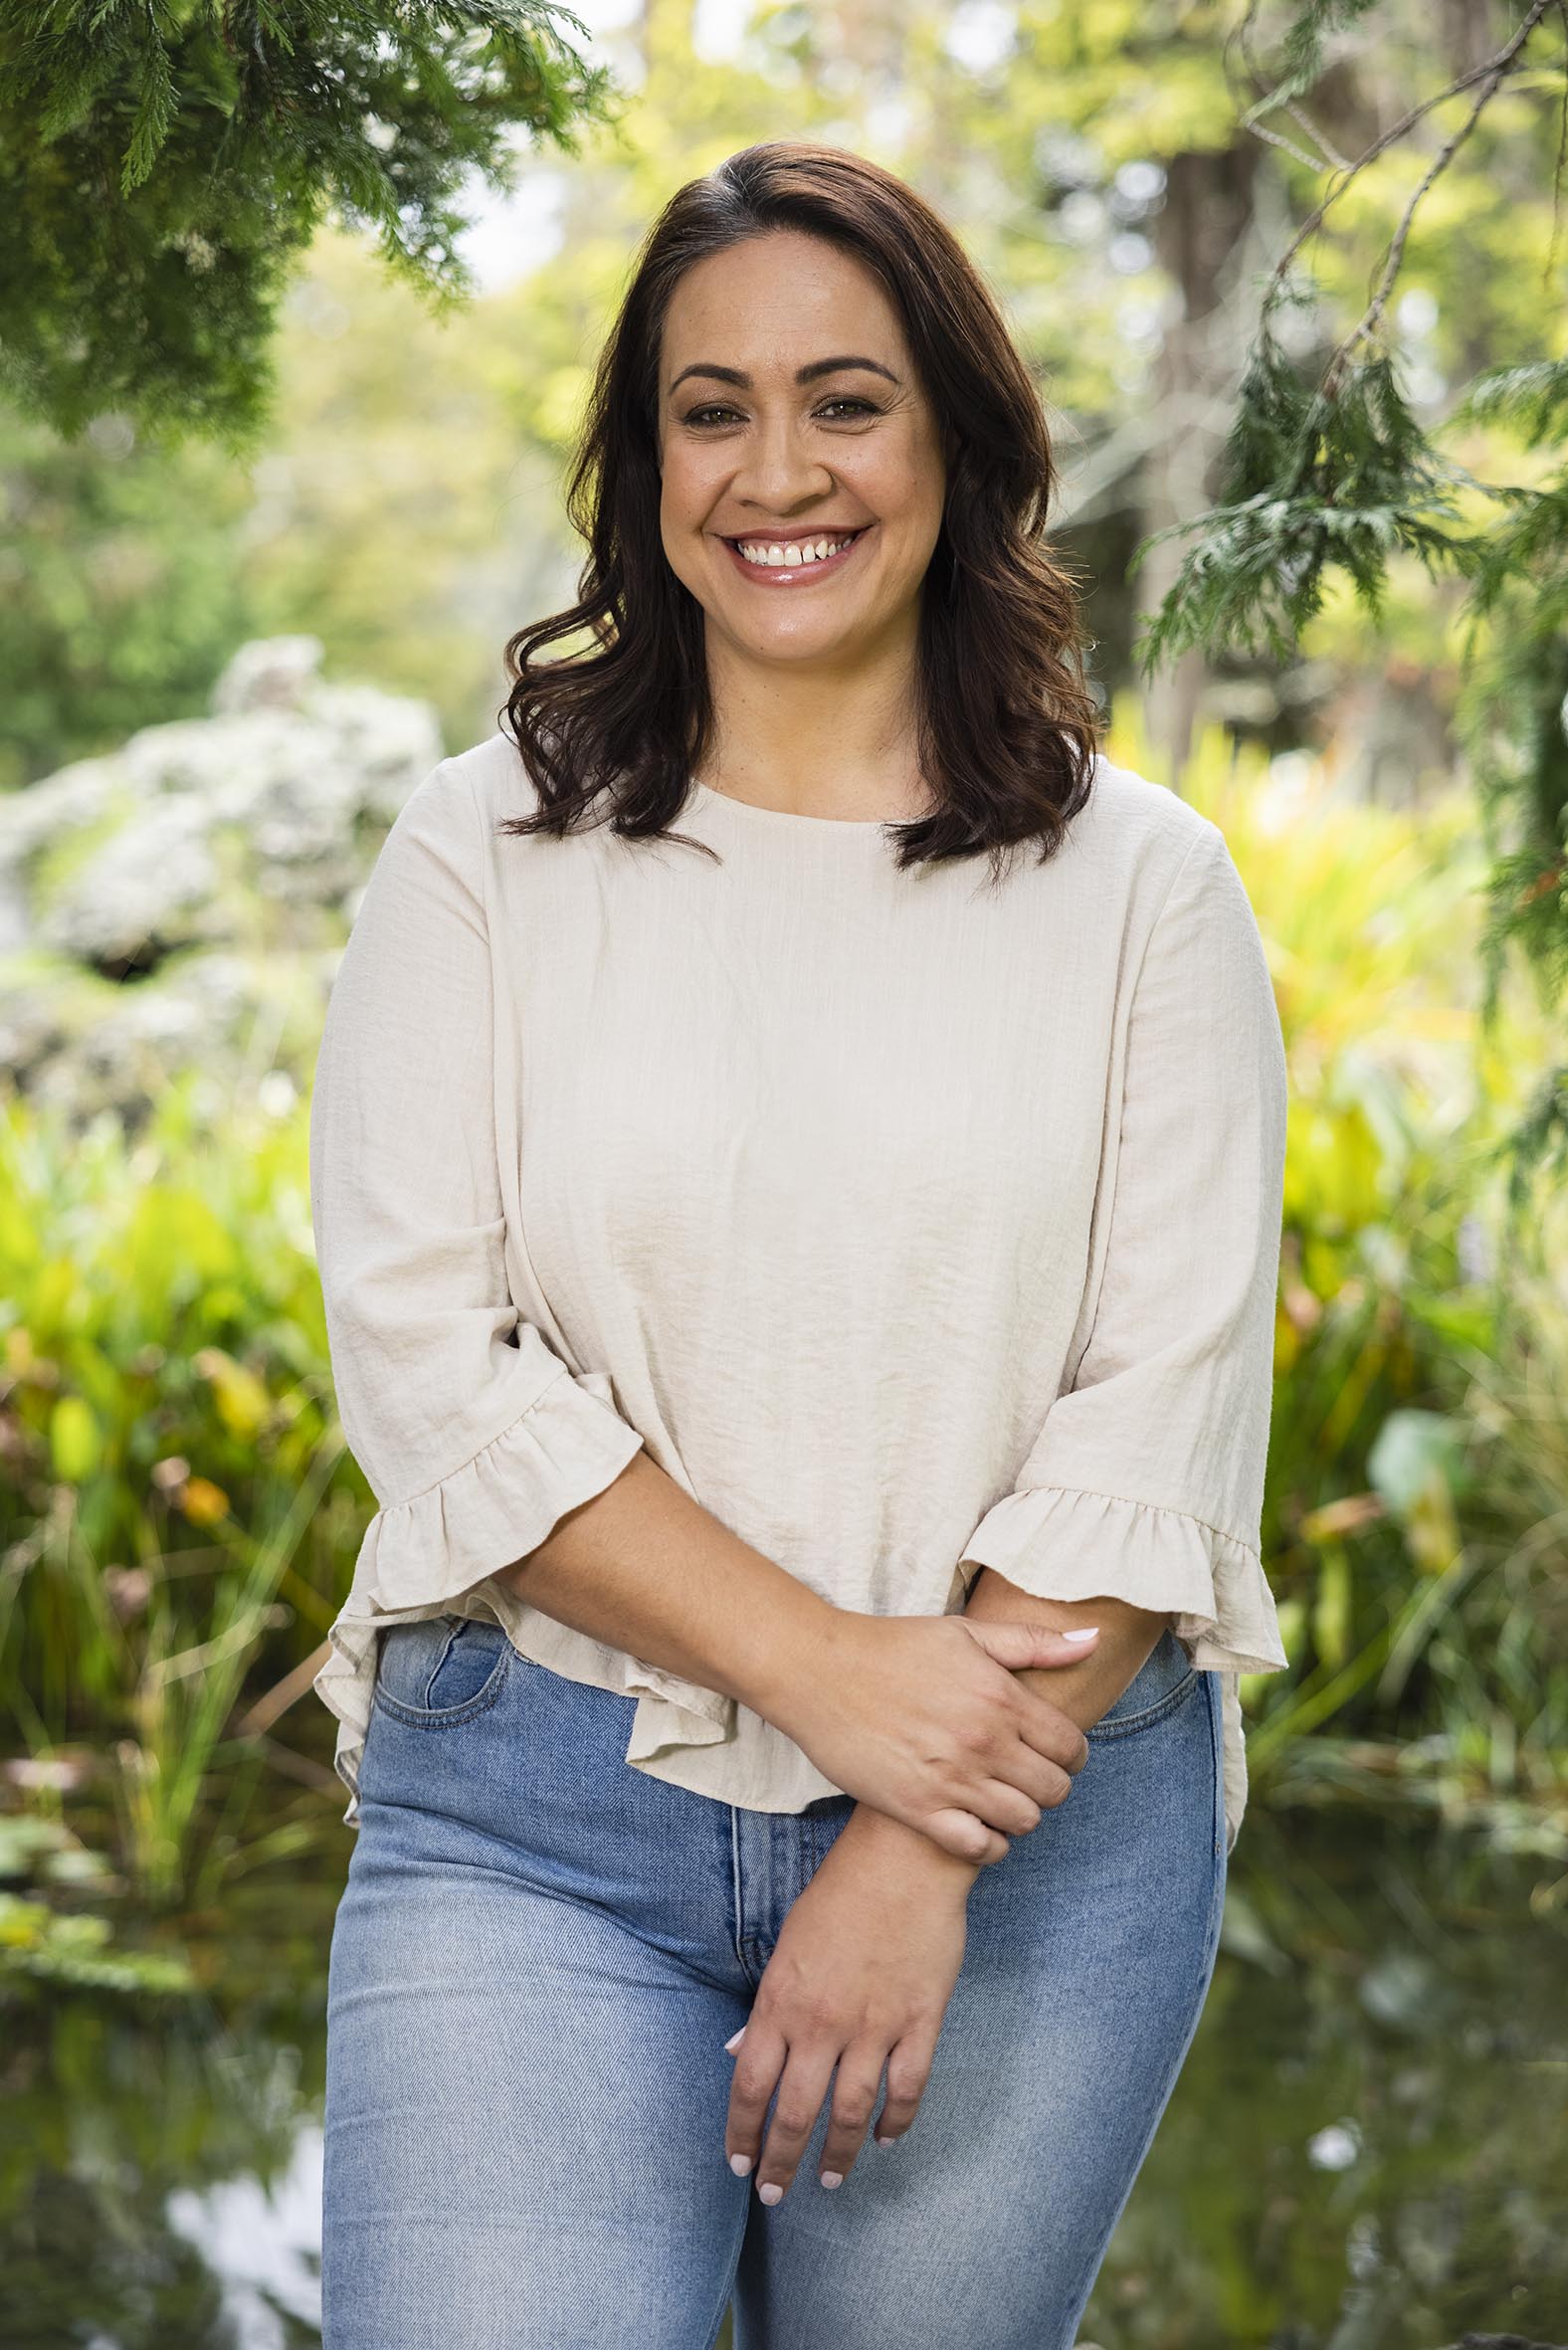 Stacey Leilua smiling and wearing a white top and blue jeans 